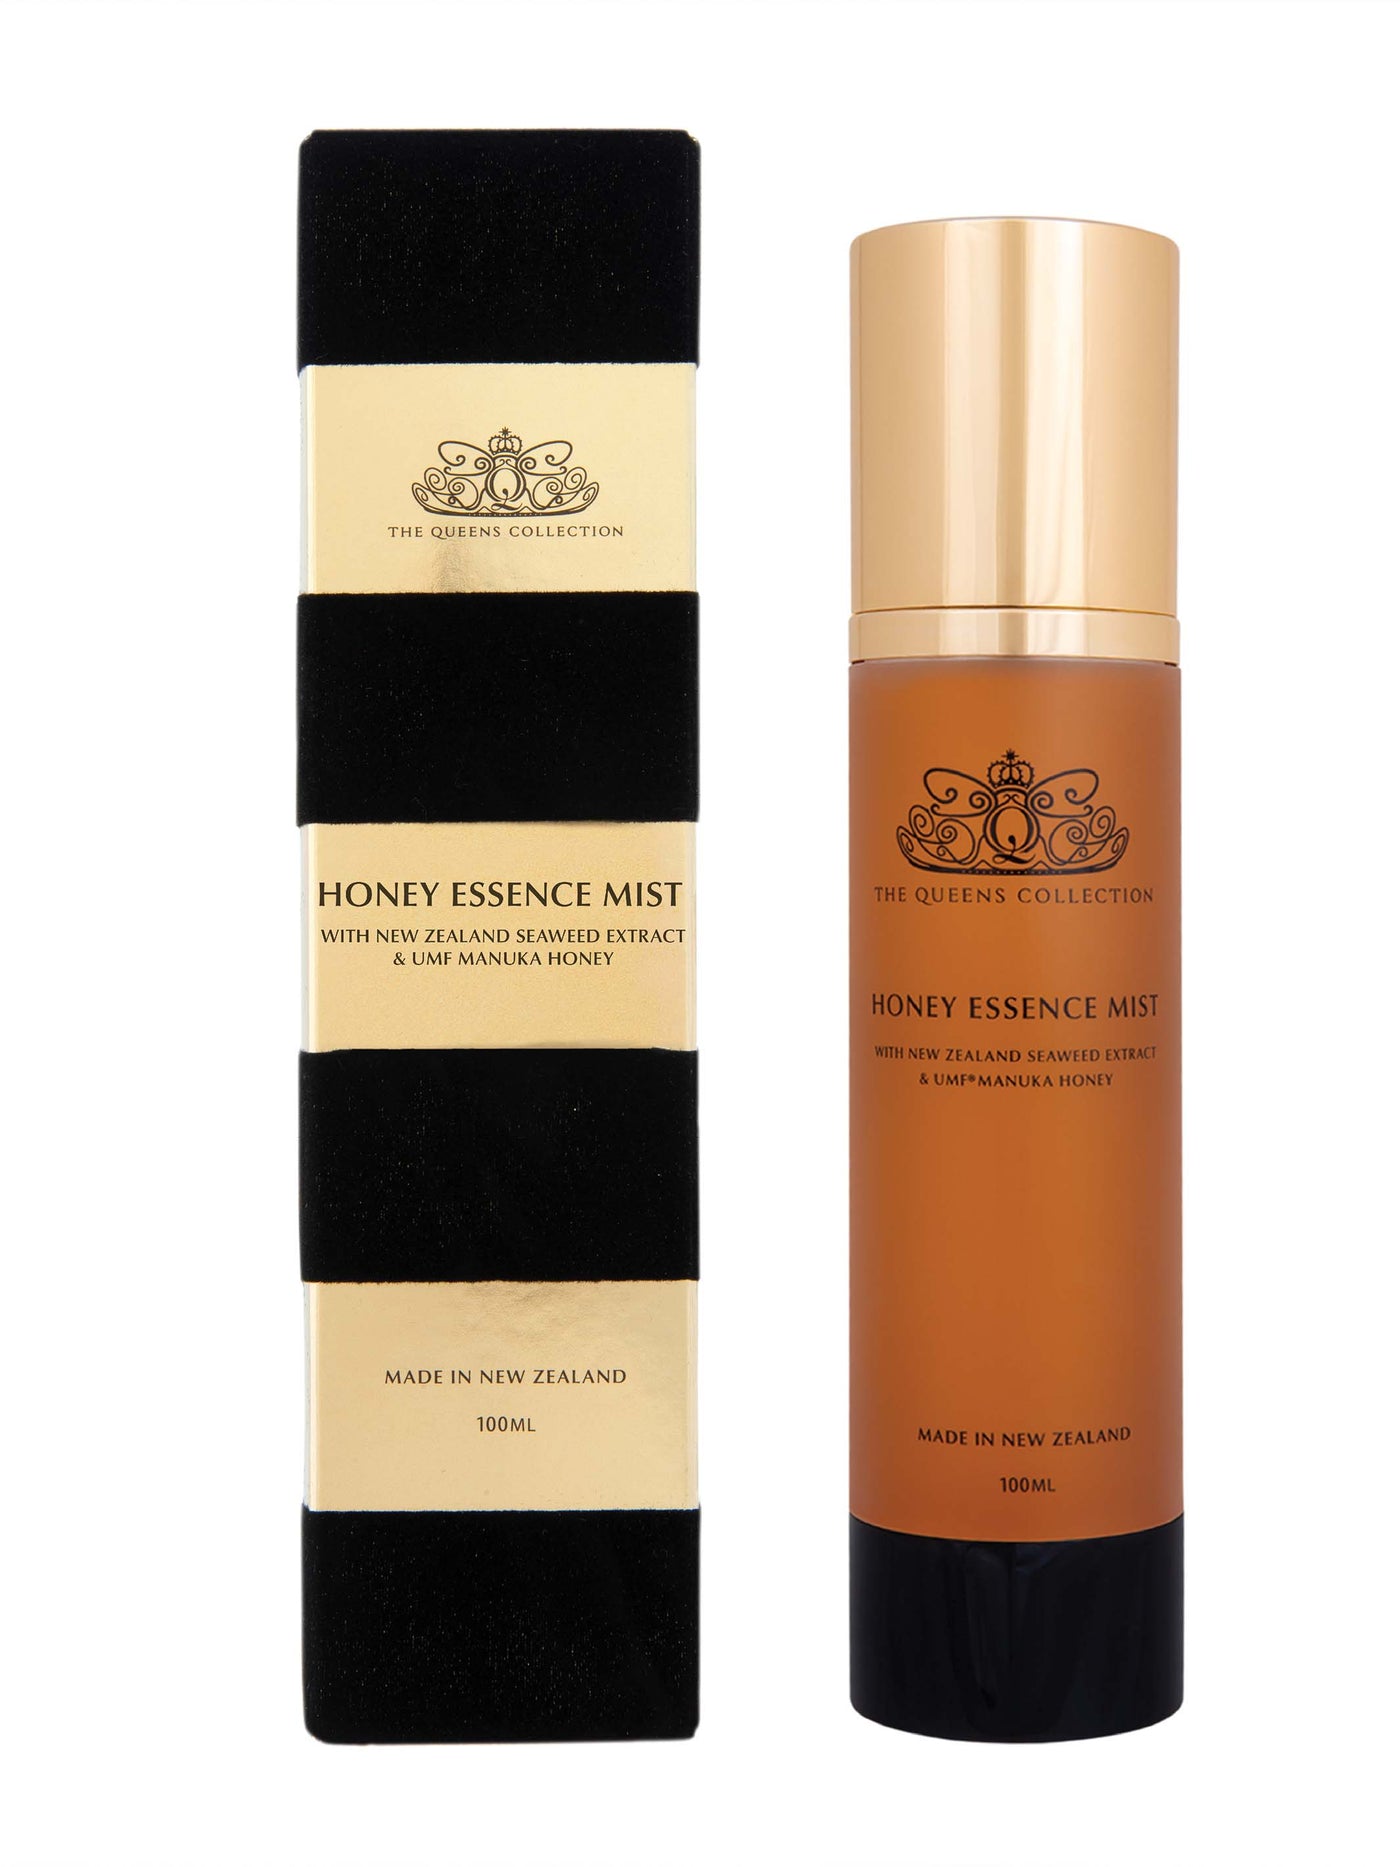 The Queen's Collection - Manuka Honey Essence Mist